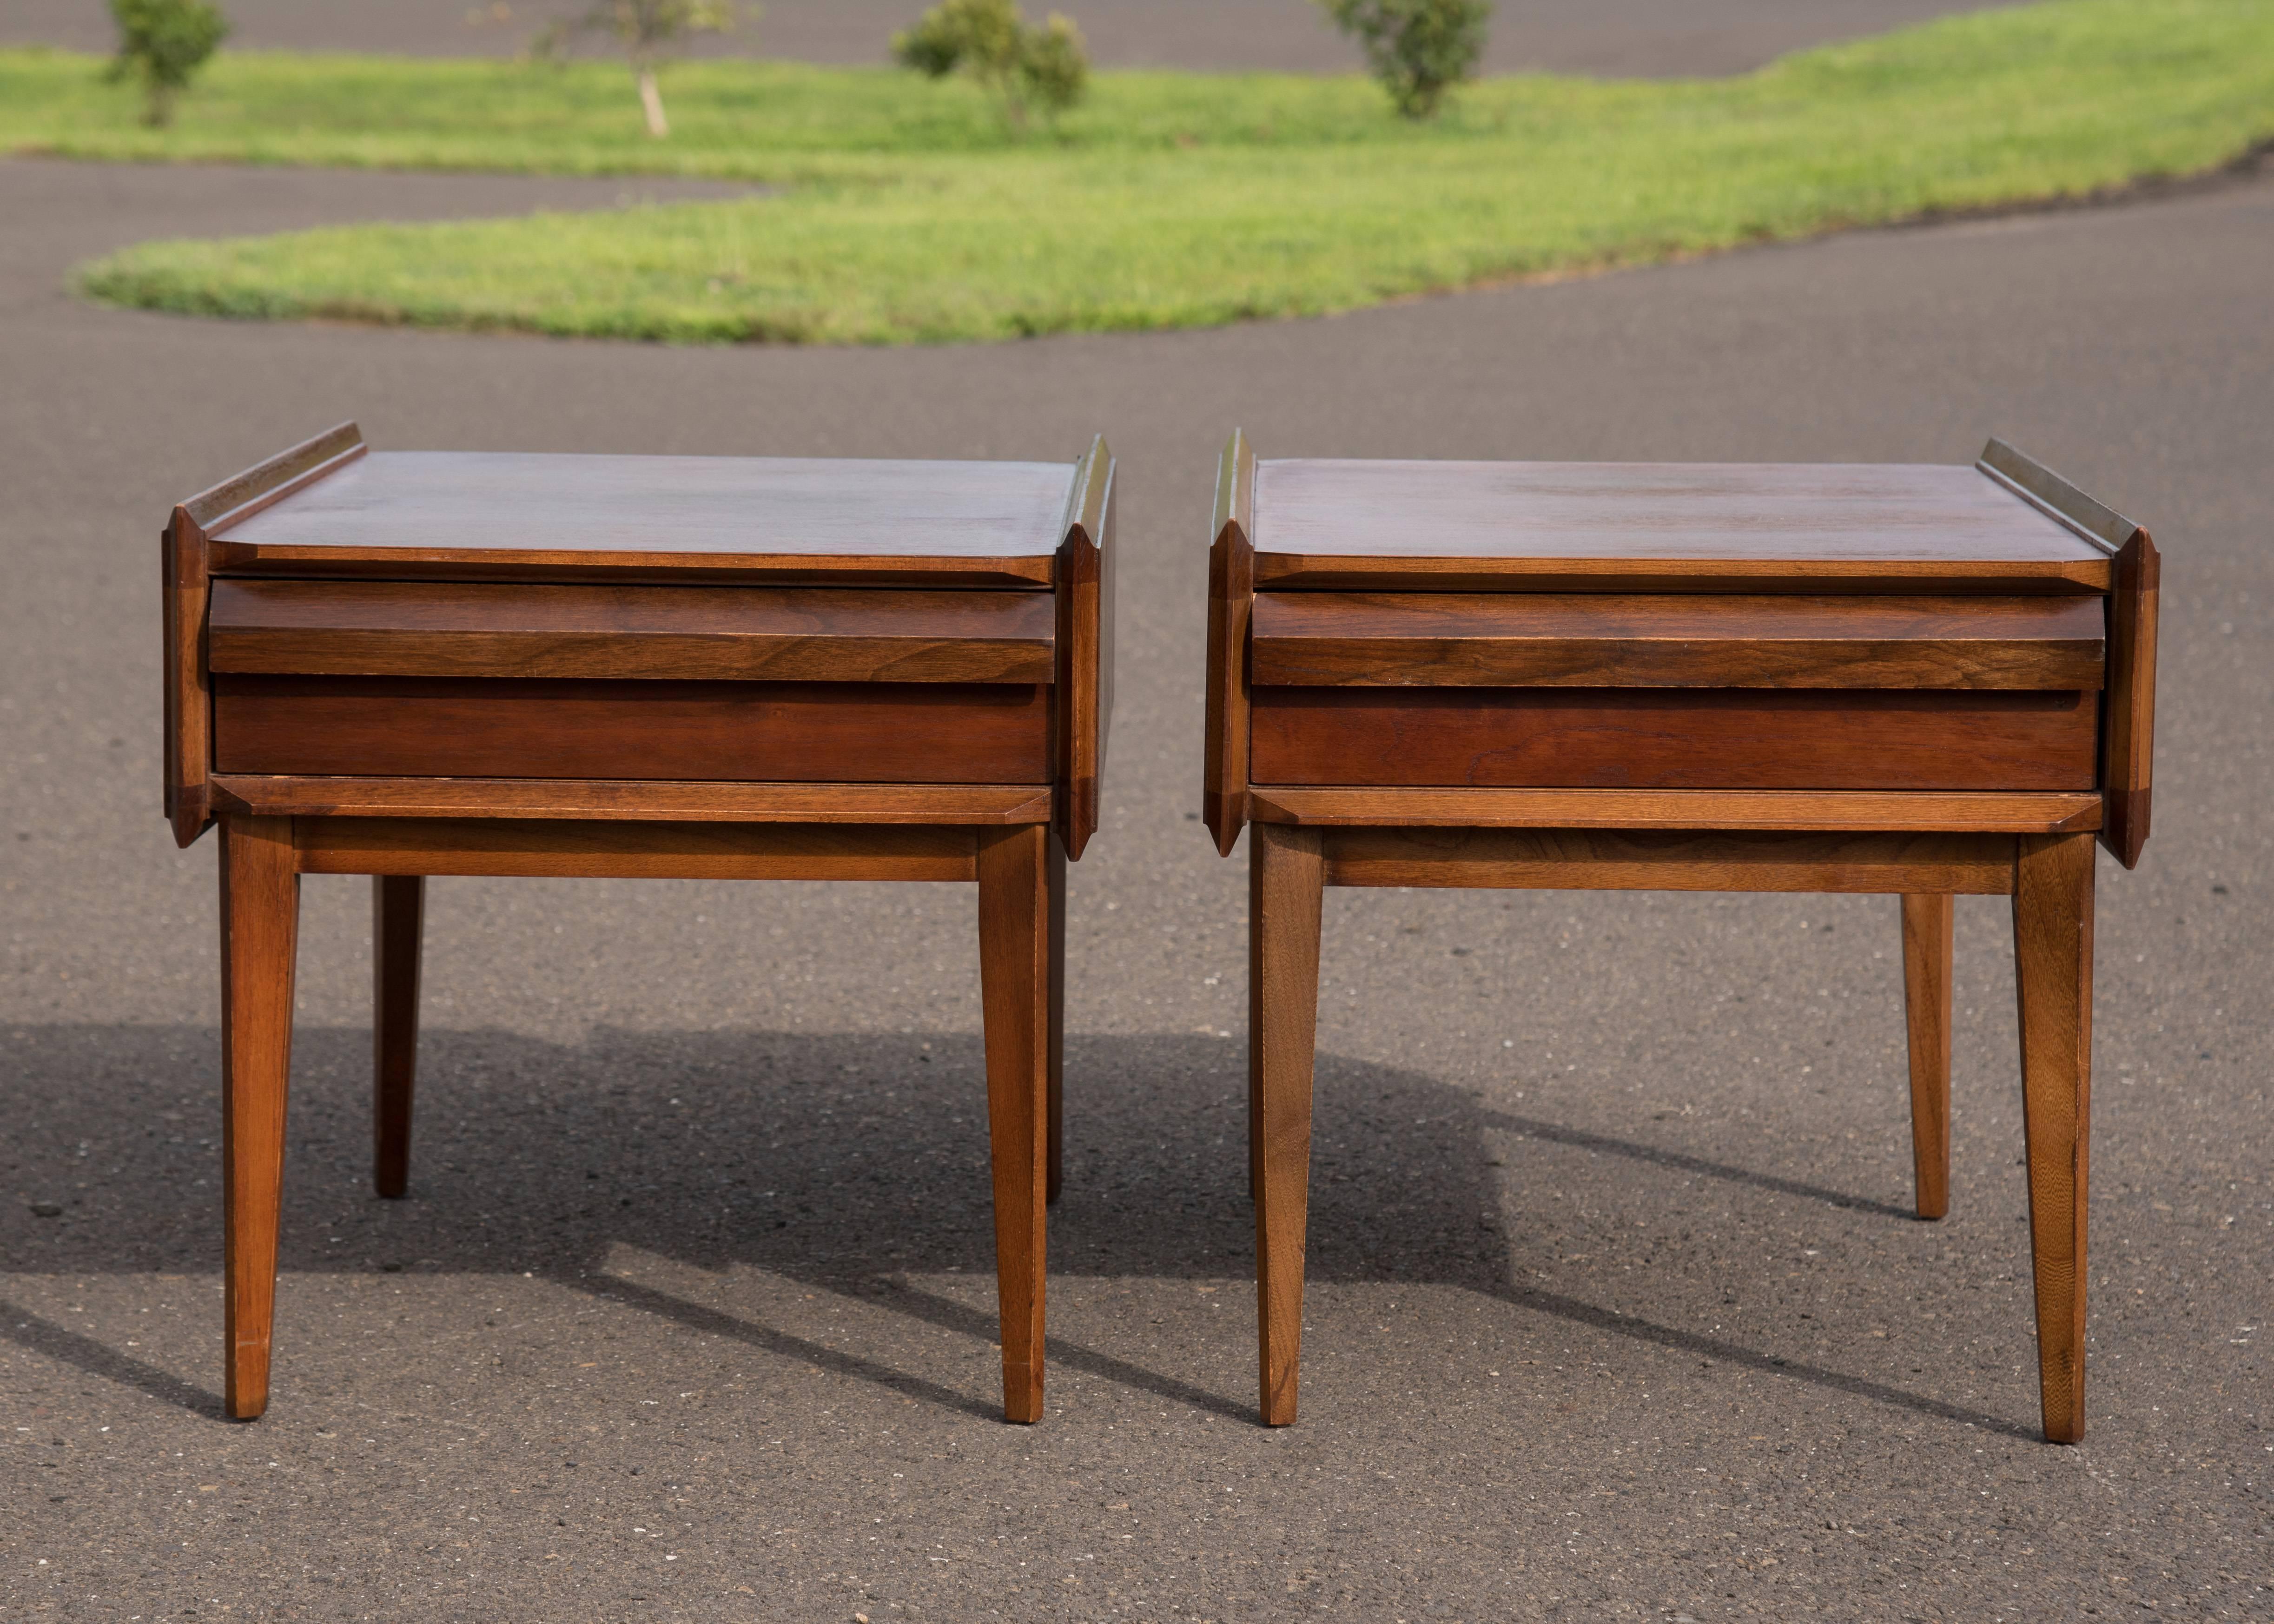 Great looking single drawer end tables with mixed woods (walnut and pecan) used for contrasting effect on the sides and drawers. Designed by Andre Bus for Lane; mark inside drawer. First Edition collection by Lane.